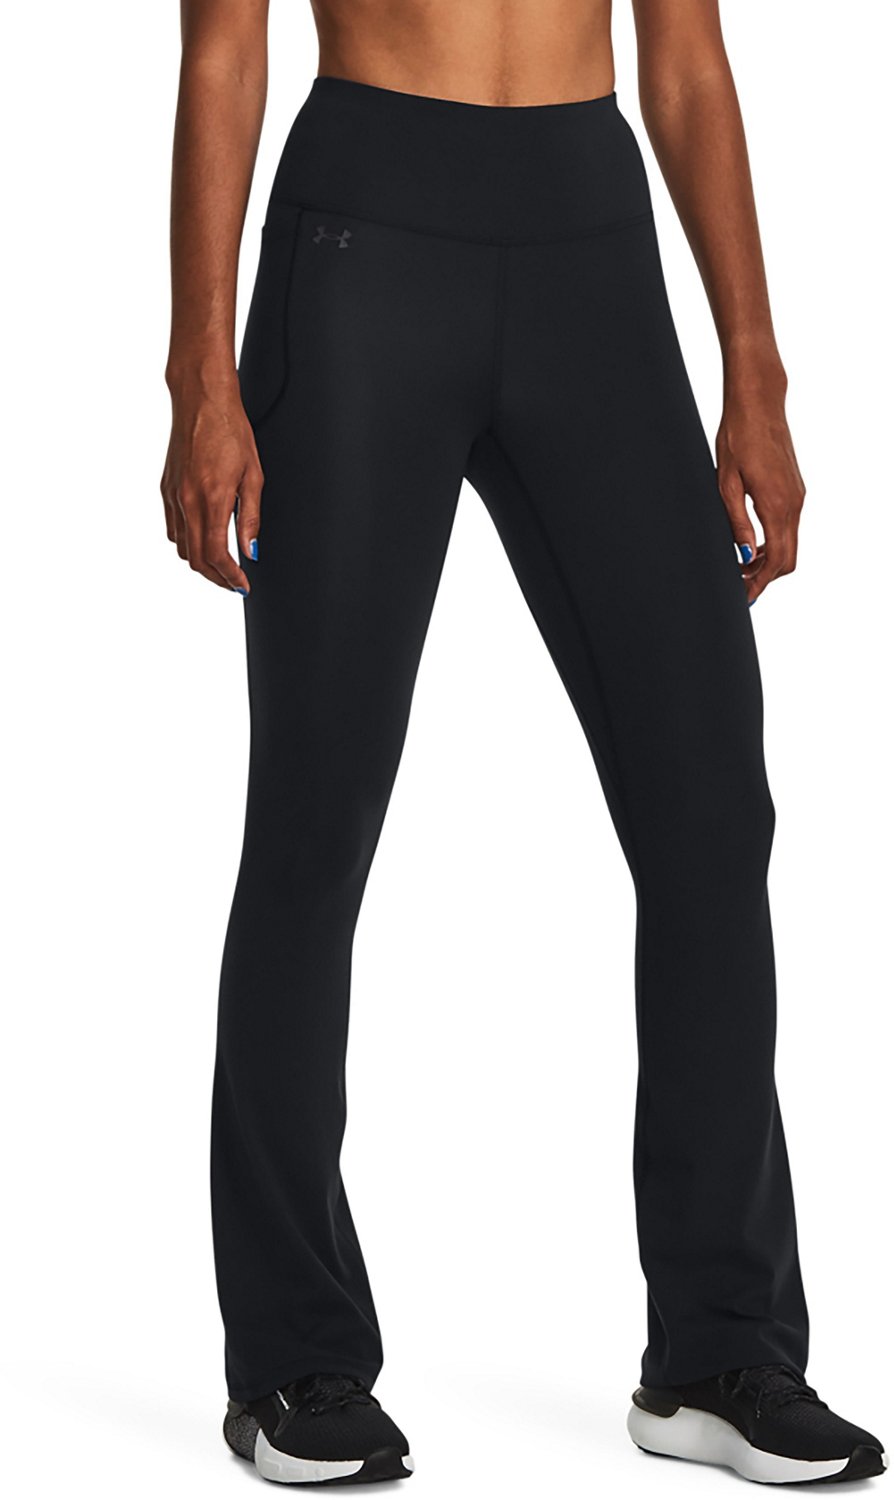 Under Armour Women's Motion Flare Pants | Academy